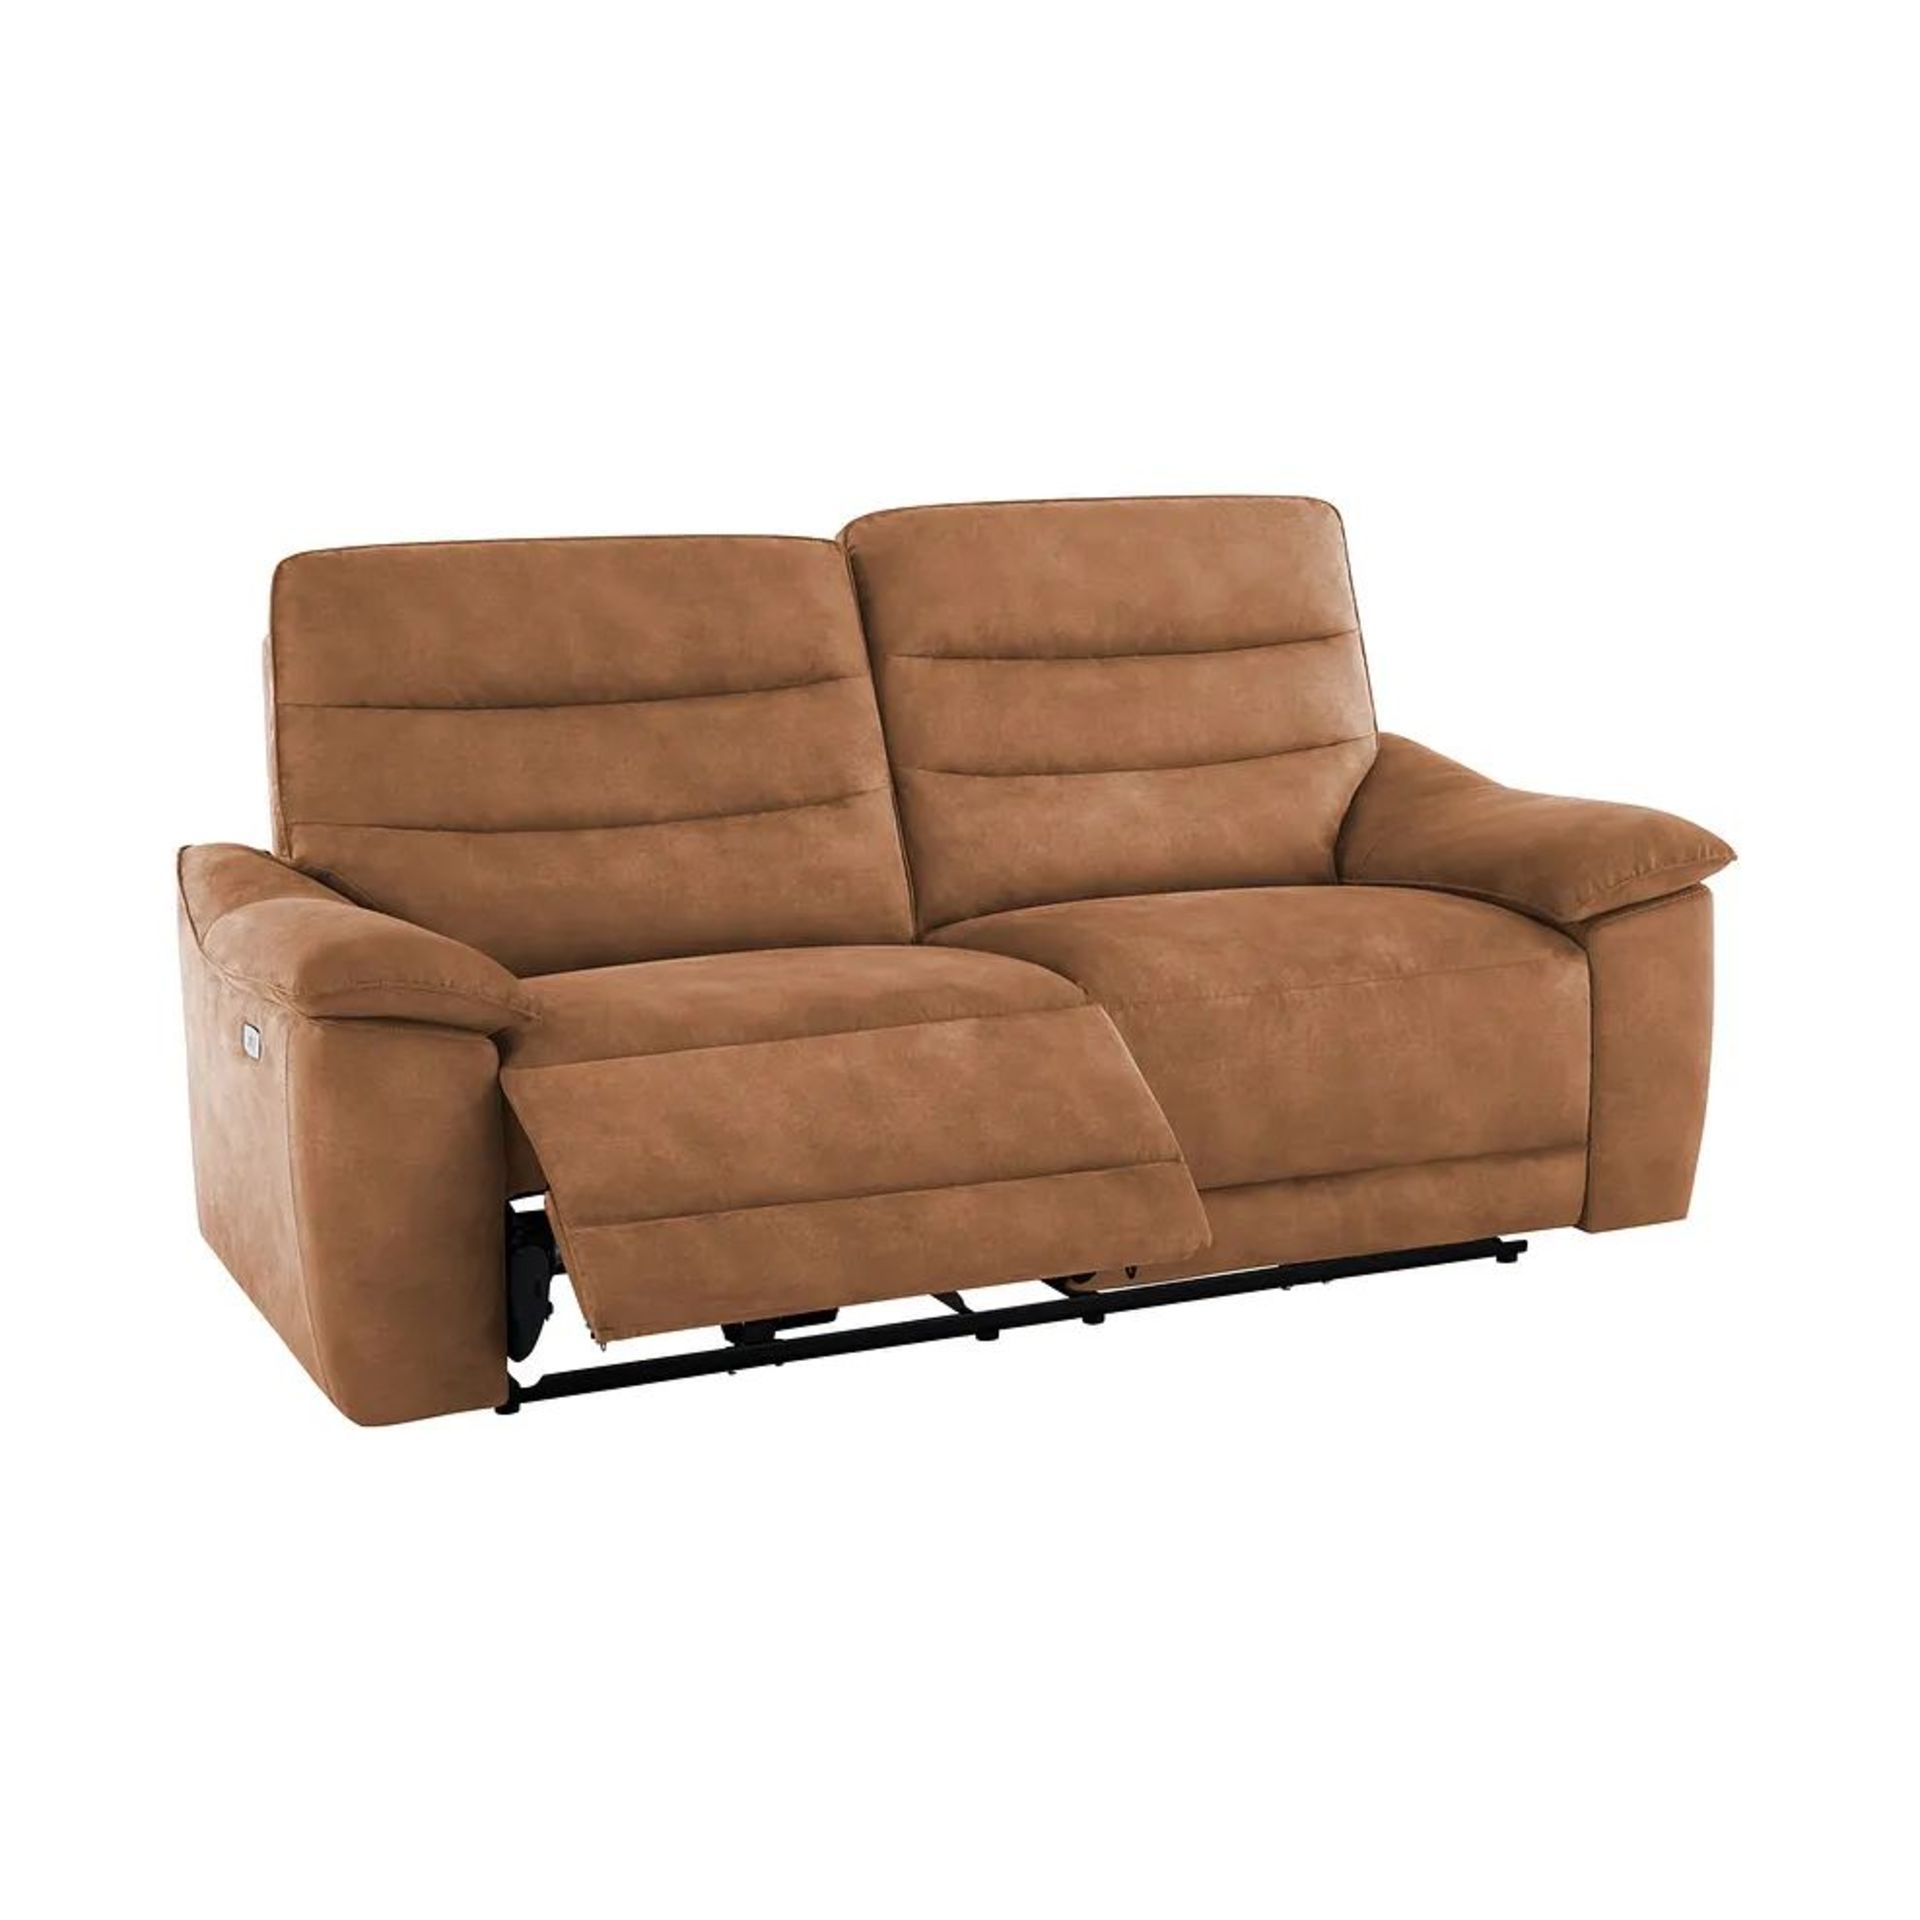 BRAND NEW CARTER 3 Seater Electric Recliner Sofa - BROWN FABRIC. RRP £1299. Shown here in Ranch - Image 3 of 12